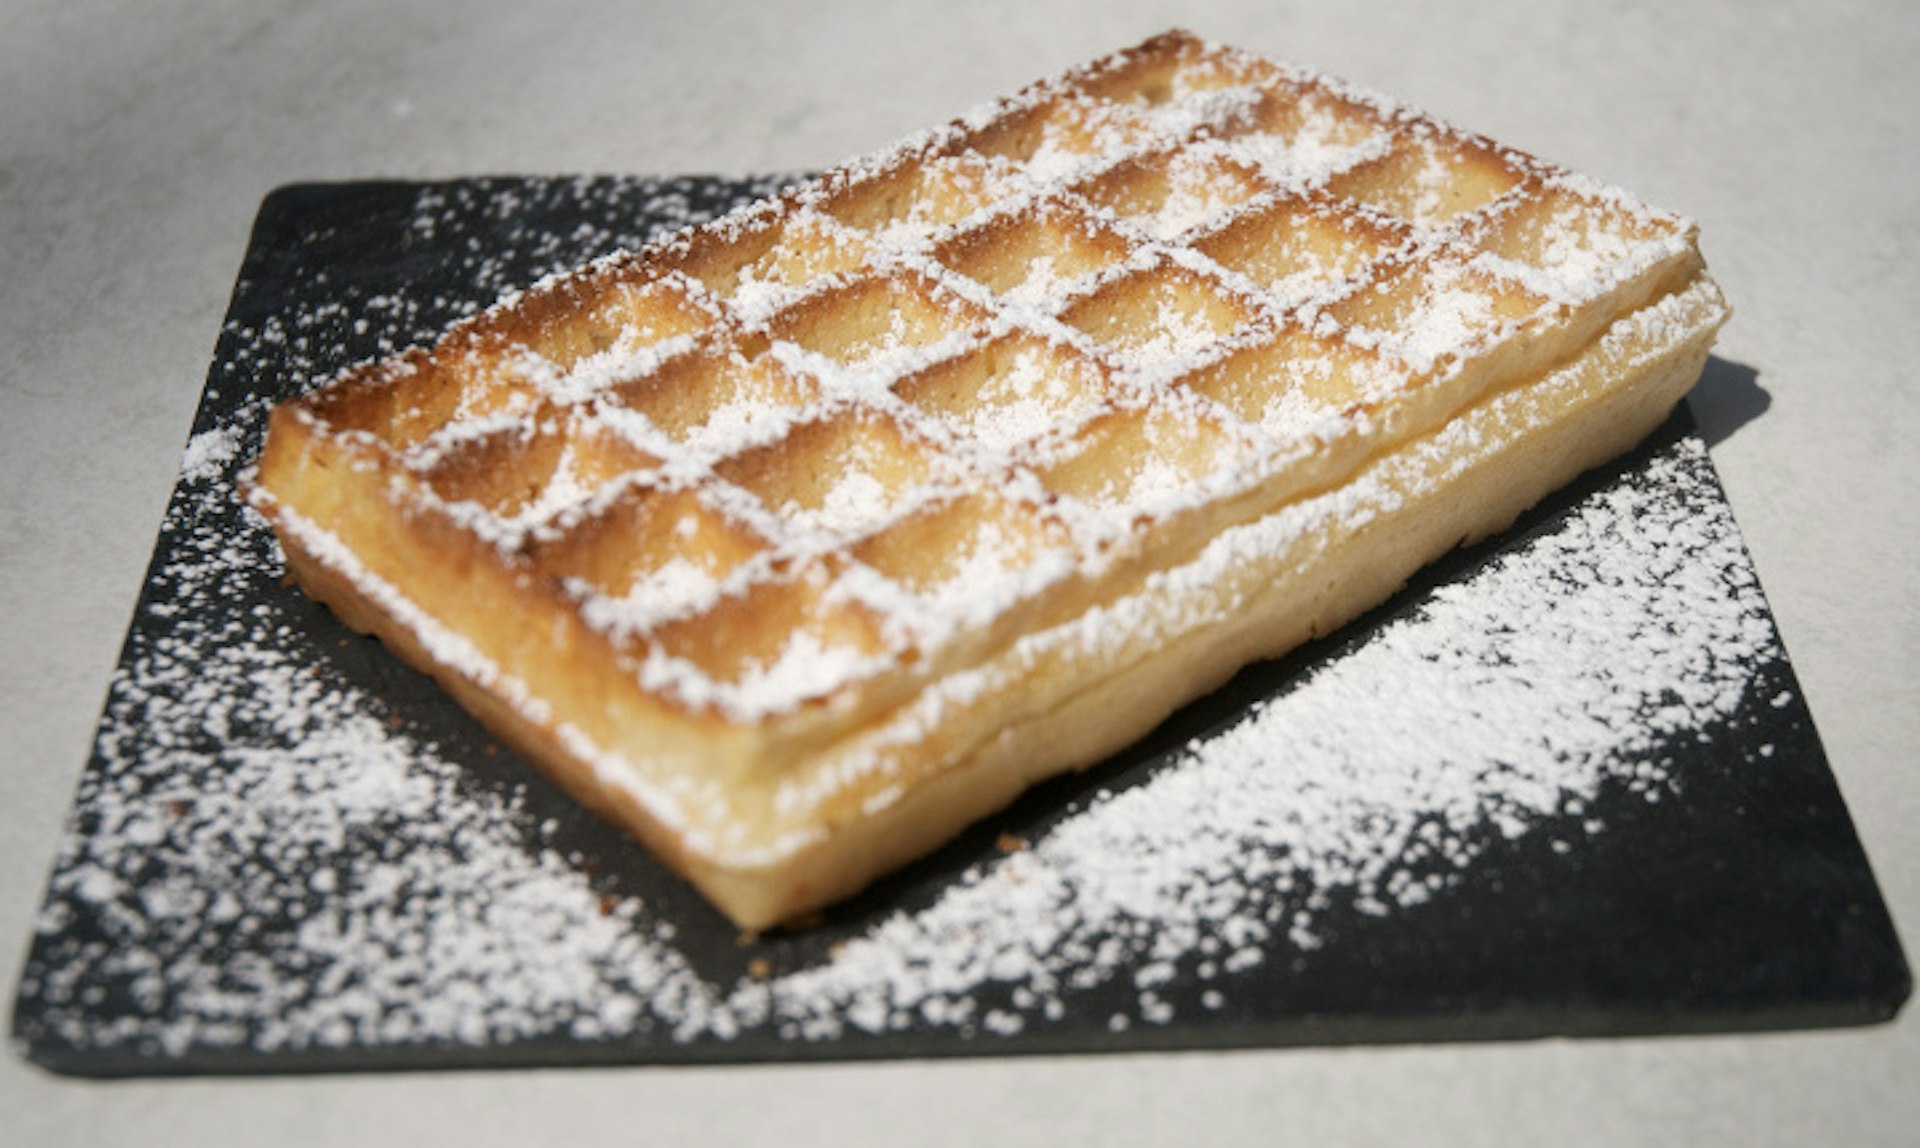 Tuck into a classic Belgian treat at Mokafé. Image by Helena Smith/Lonely Planet